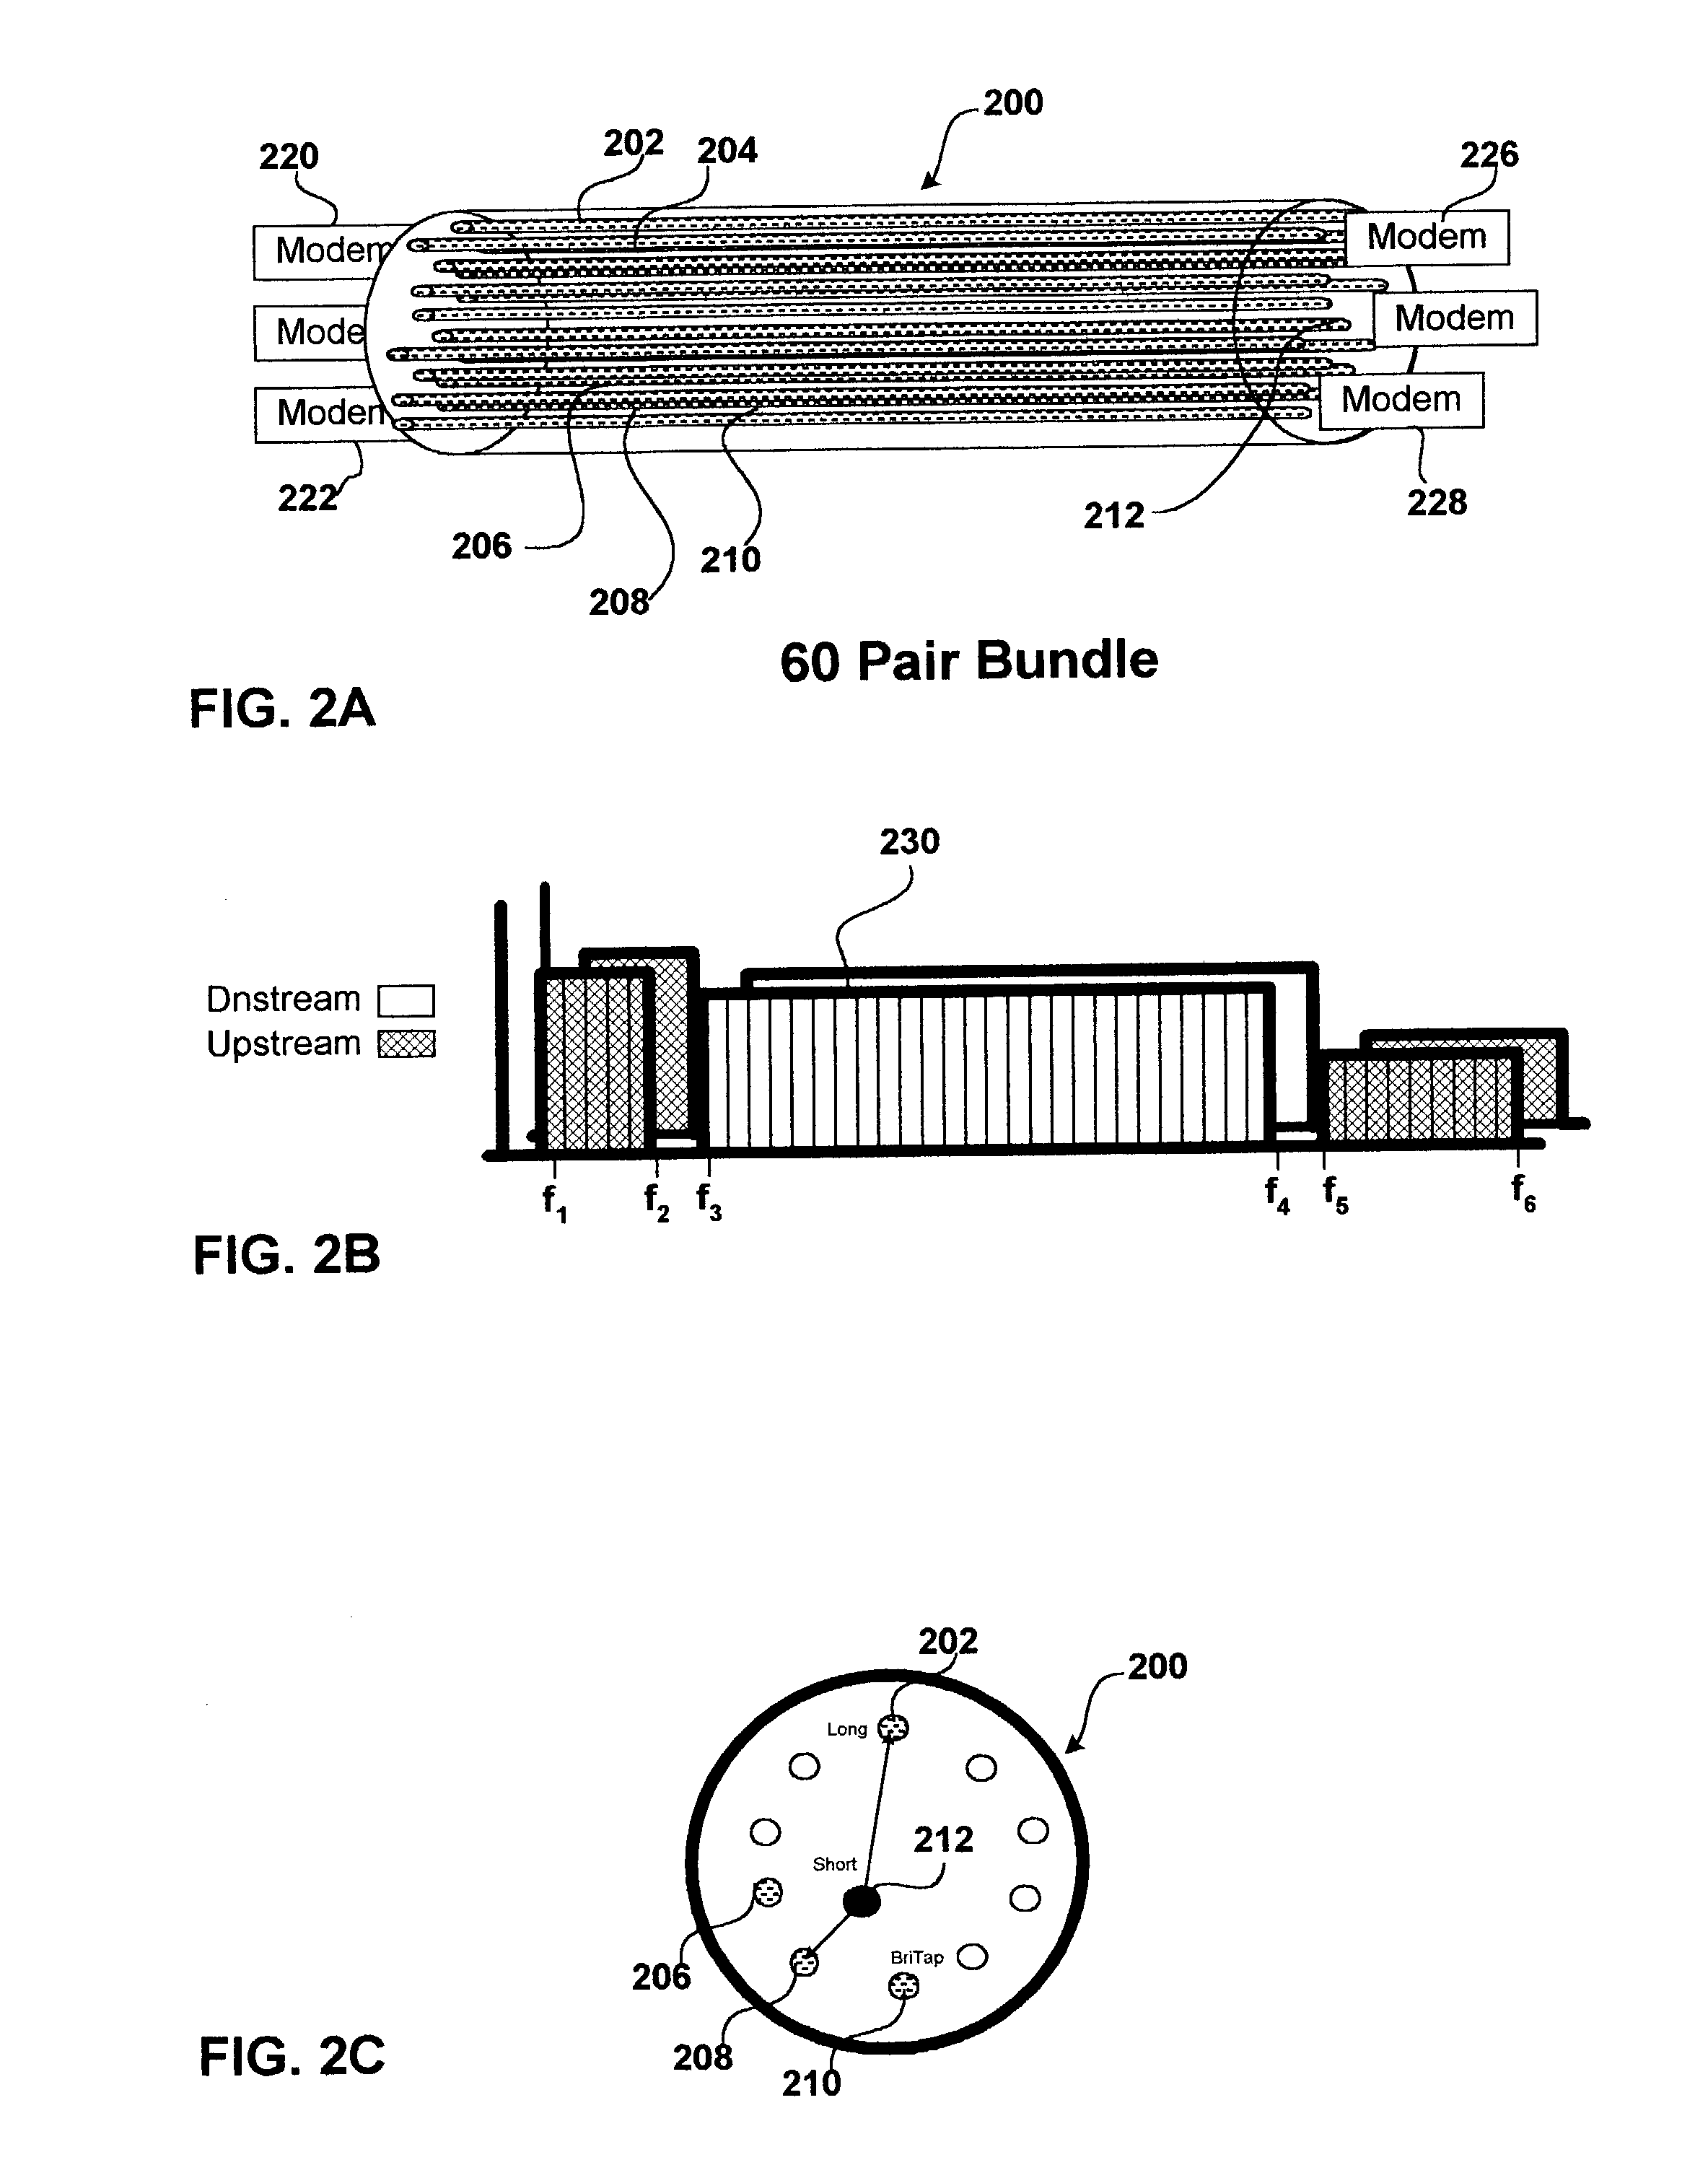 Method and apparatus for optimization of channel capacity in multi-line communication systems using spectrum management techniques